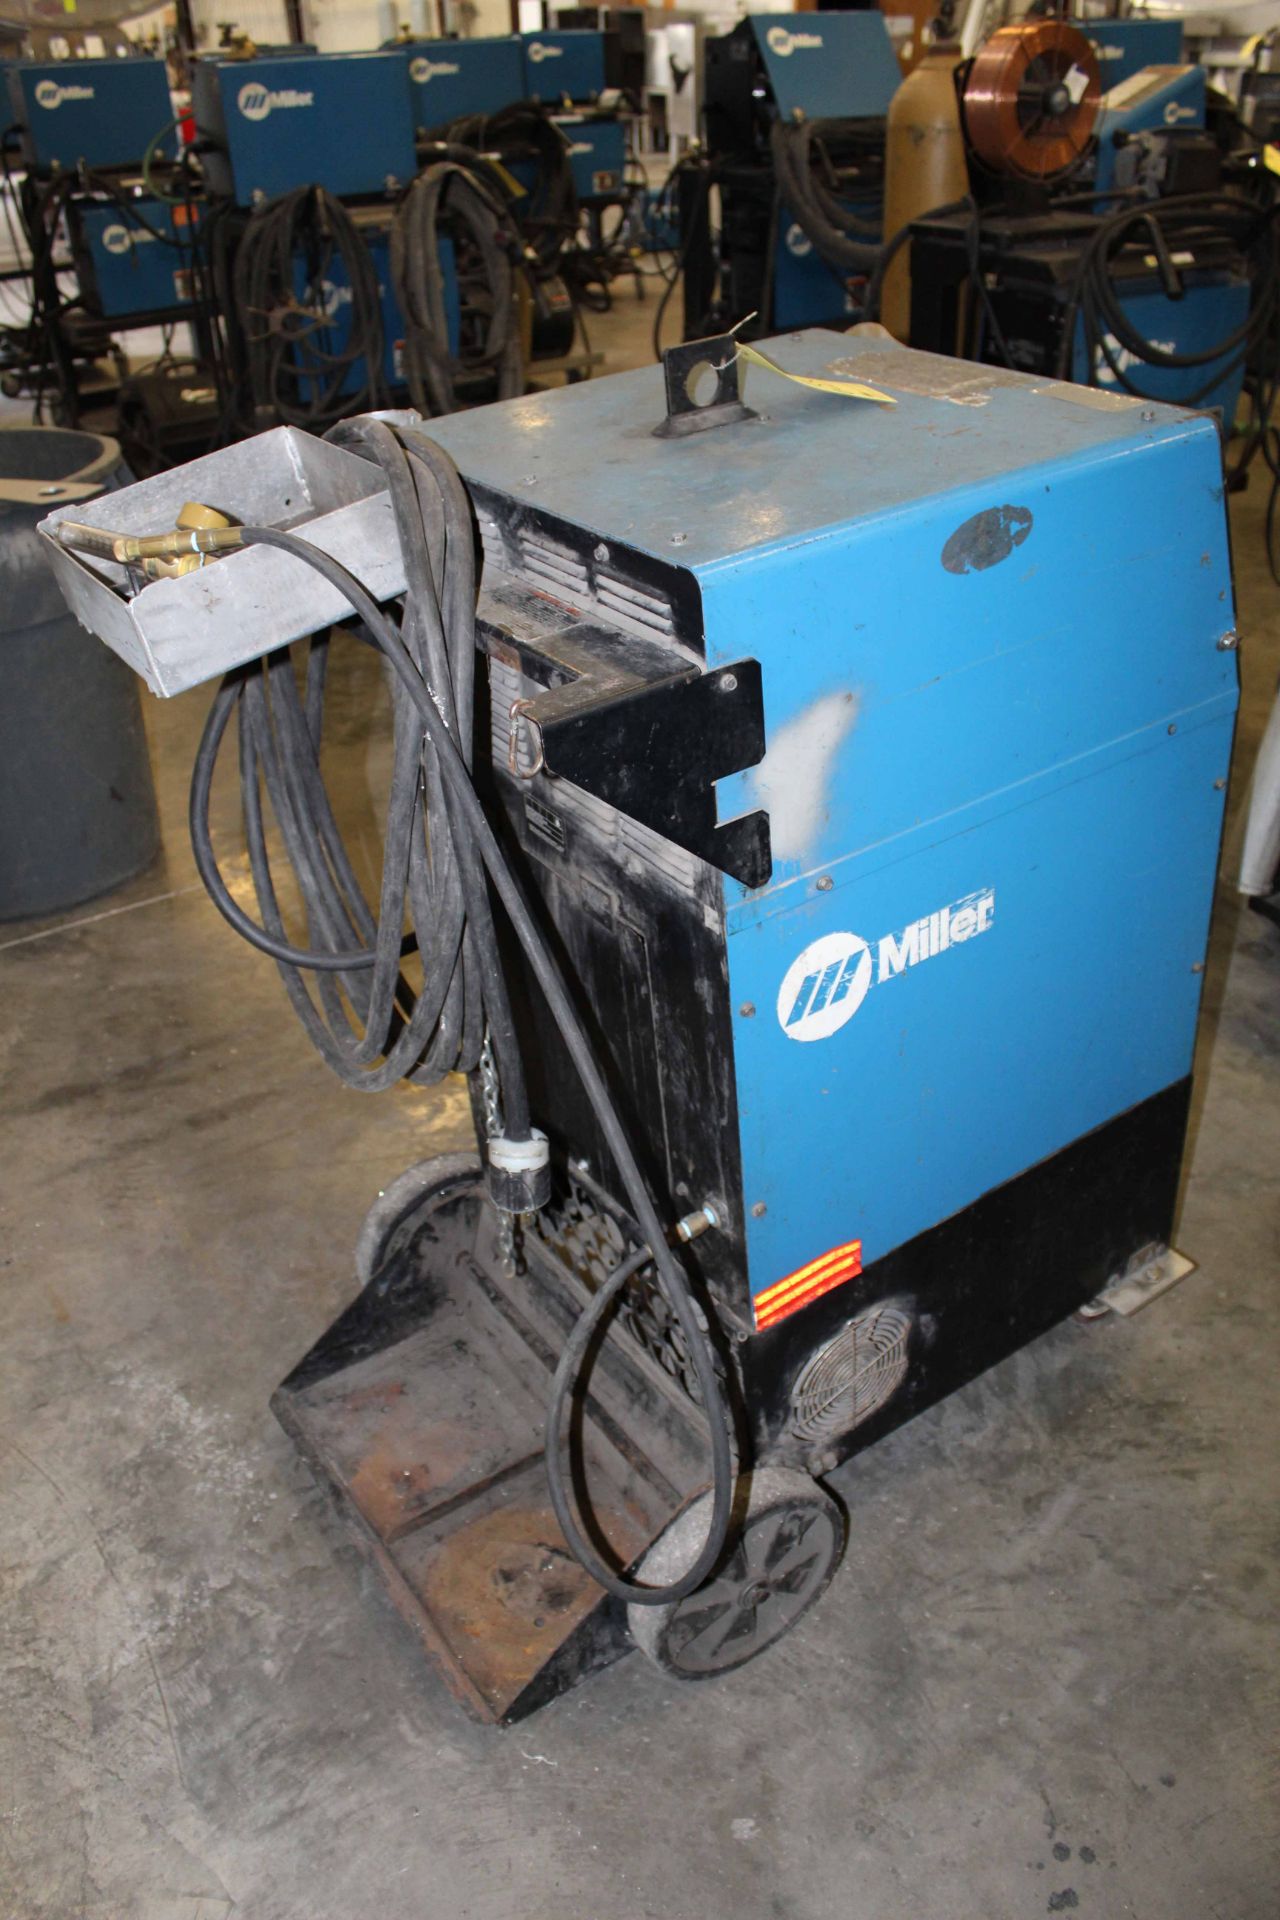 WELDING MACHINE, MILLER SYNCROWAVE 250DX, new 2010, S/N MA210516L - Image 2 of 2